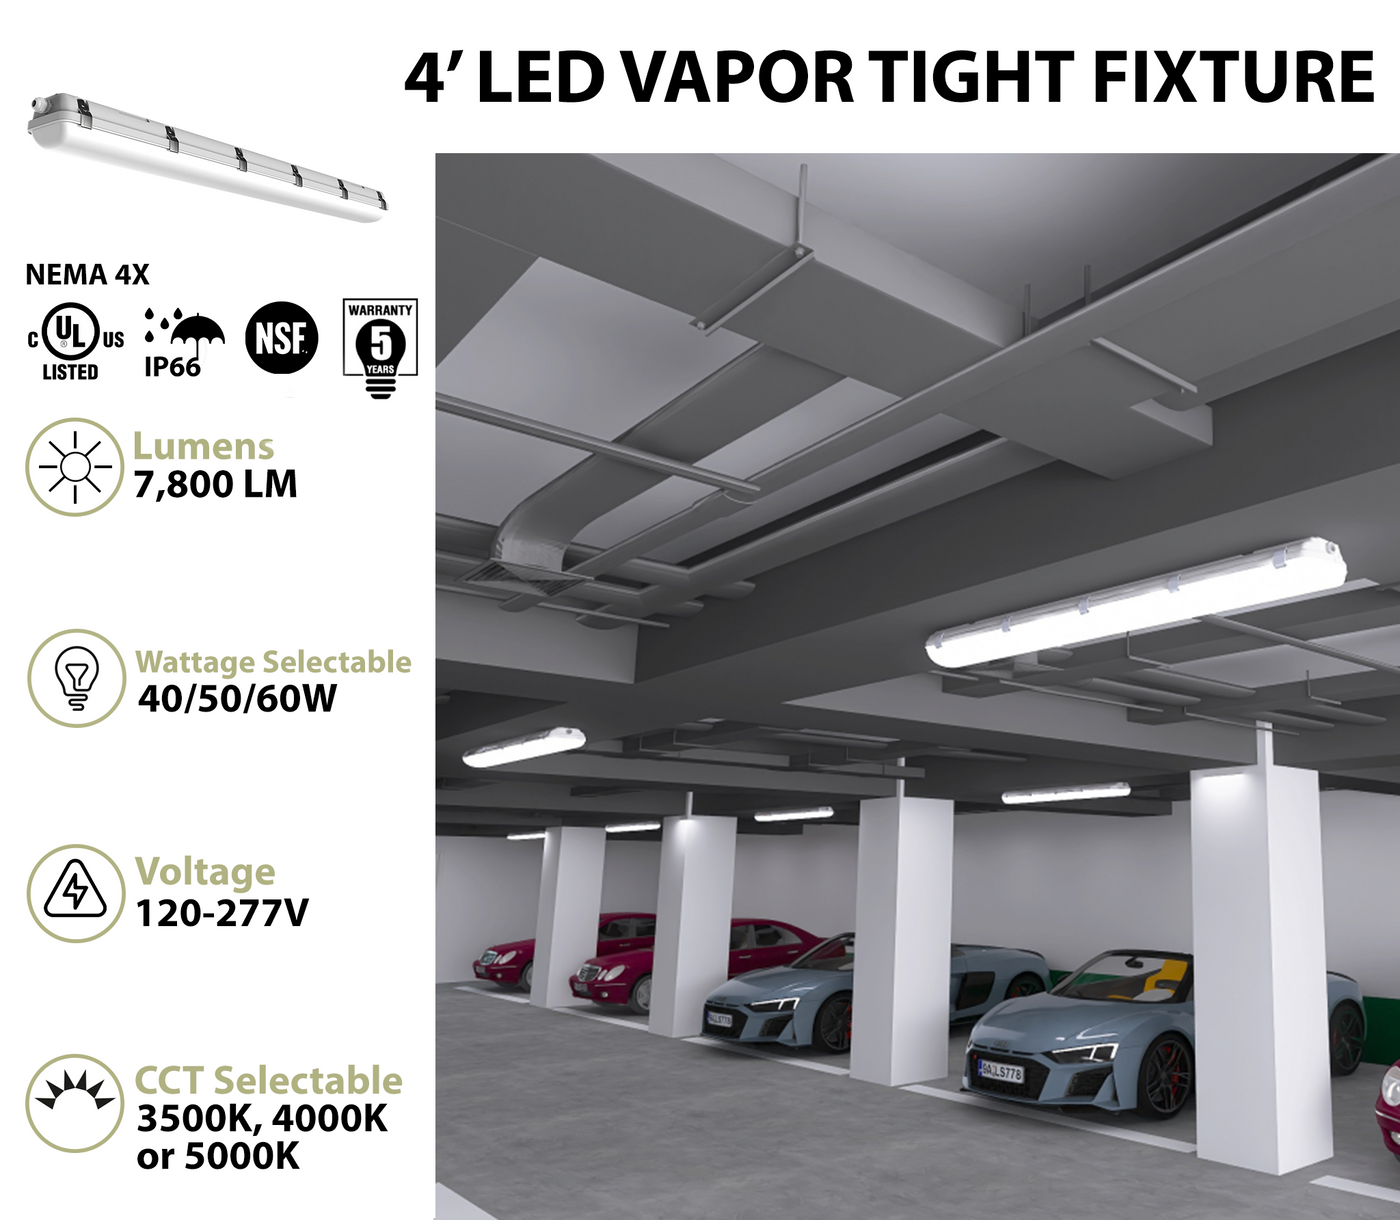 4FT LED Vapor Tight Fixture, 7800 Lumen Max, CCT and Wattage Selectable, 120-277V